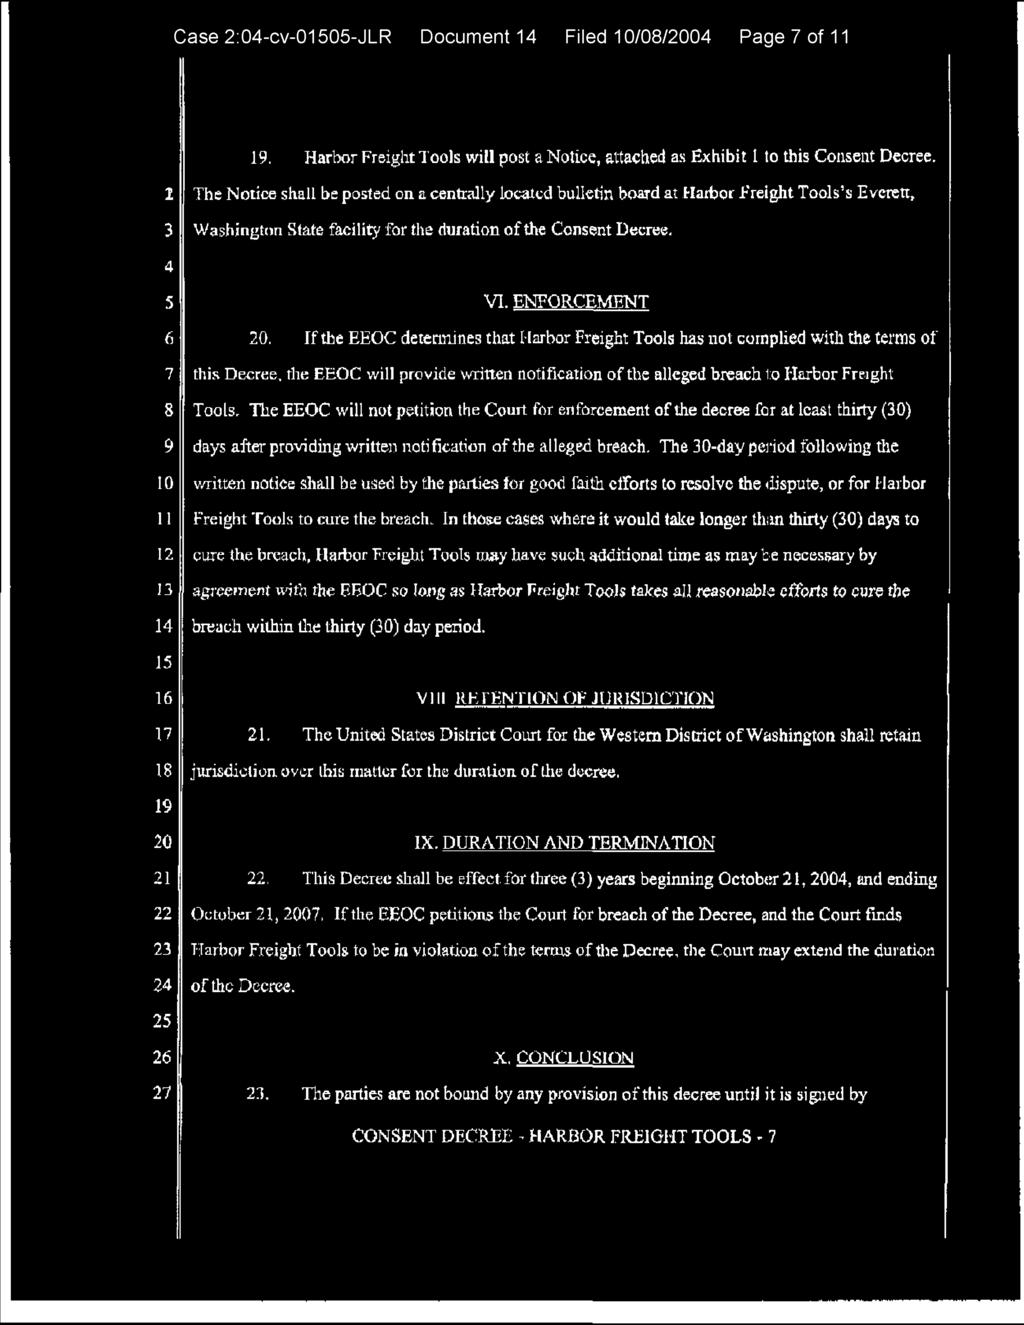 Case 2:0-cv-00-JLR Document Filed /0/0 Page of 1 1. Harbor Freight Tools will post a Notice, attached as Exhibit I to this Consent Decree.